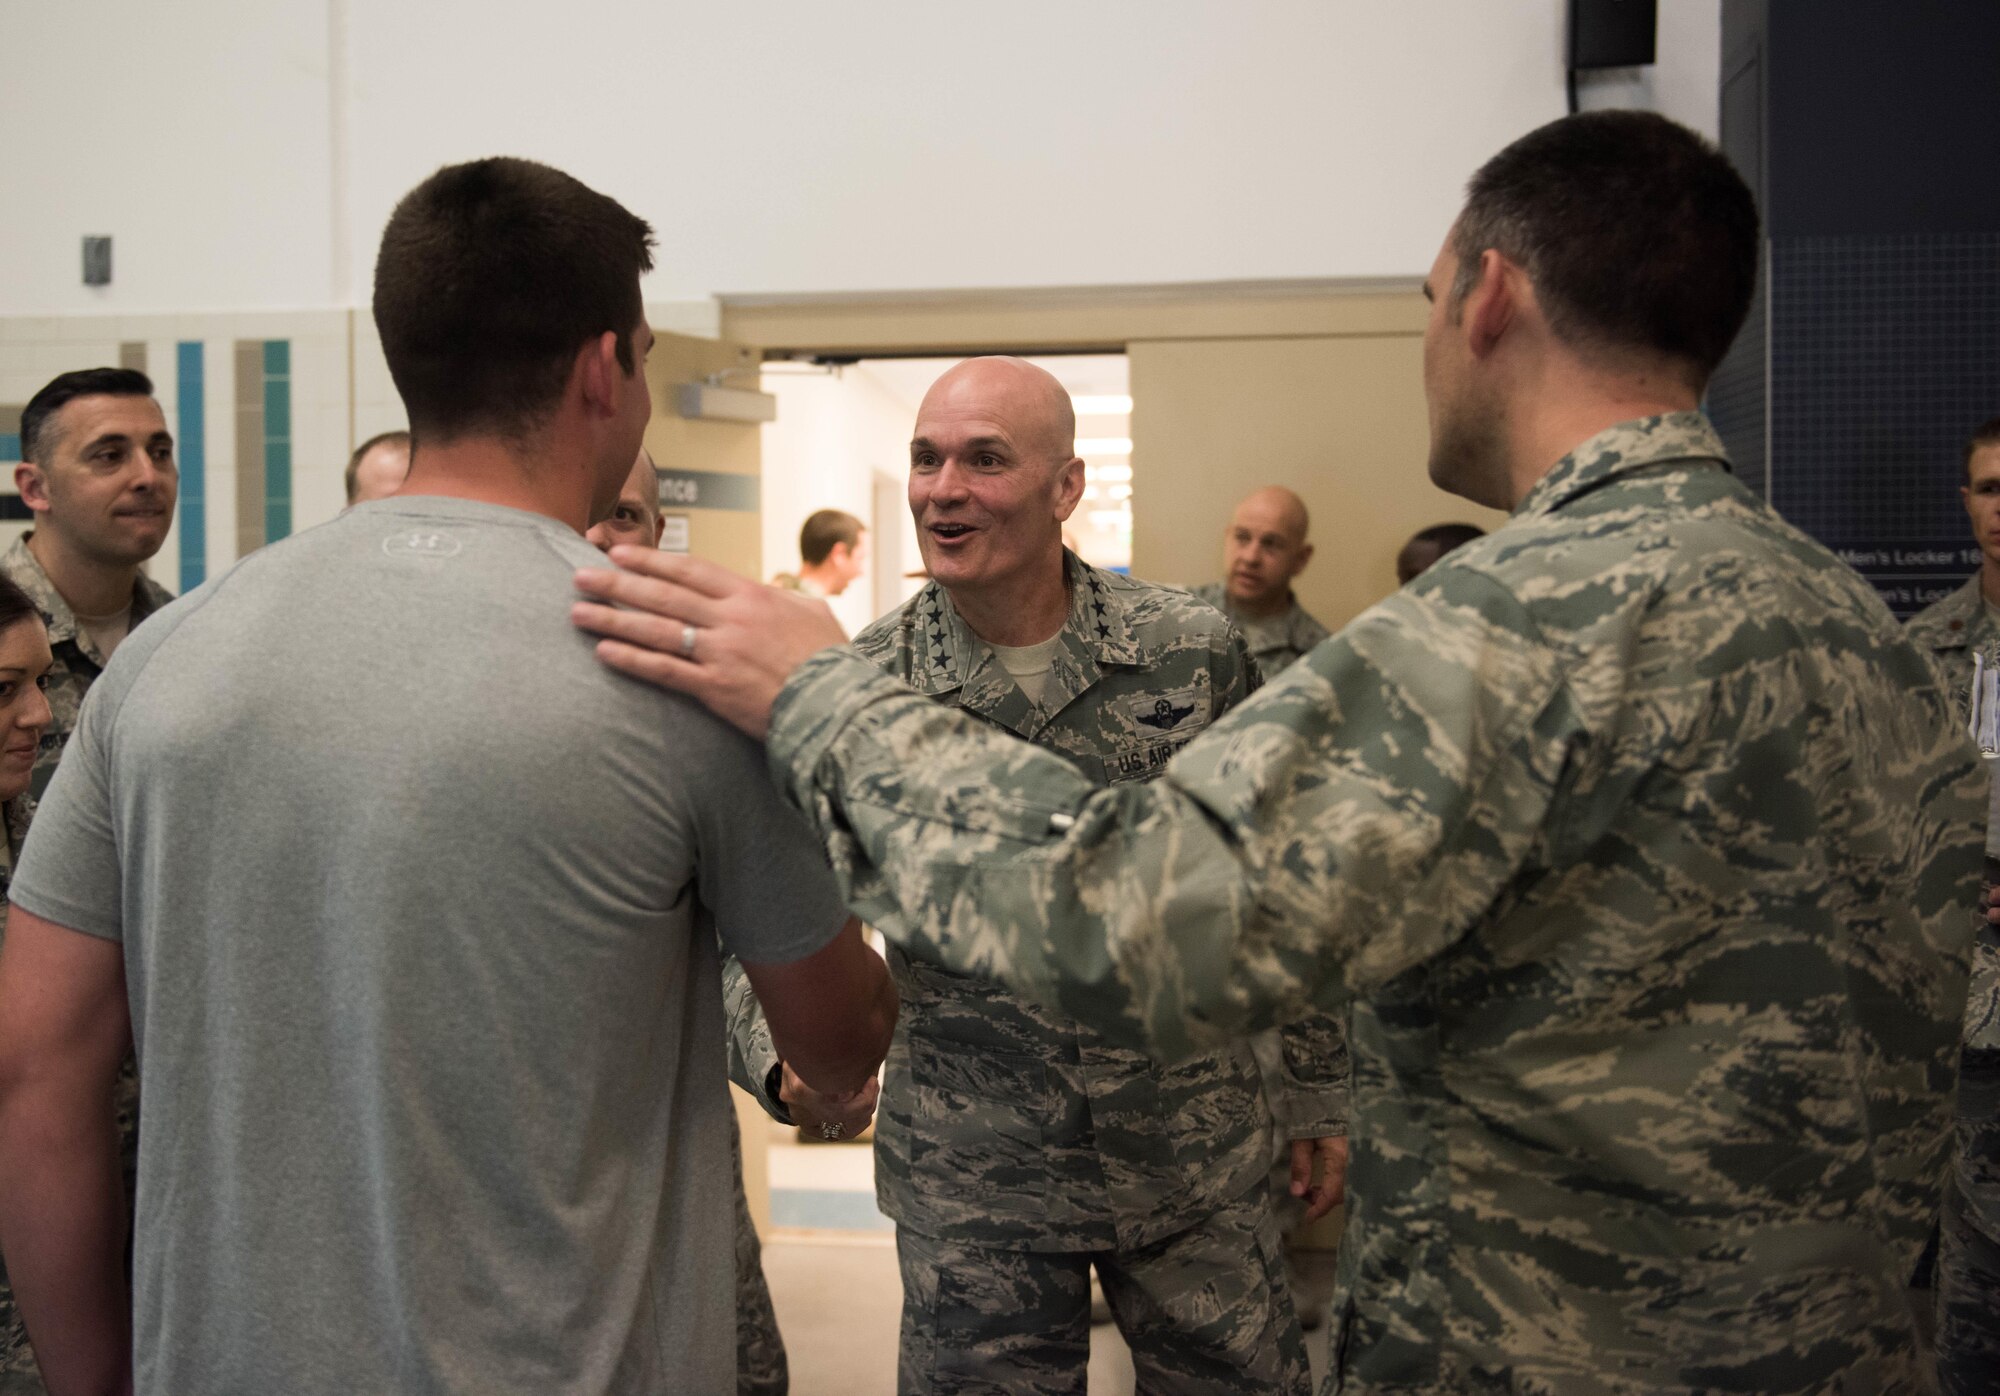 Gen. Carlton D. Everhart II, Air Mobility Command commander, recognizes various 336th Training Group Airmen for their performance and leadership in the Survival, Evasion, Resistance and Escape water survival training program June 19, 2017, at Fairchild Air Force Base, Washington. The 336th TRG is the Air Force's sole unit responsible for training SERE specialists, who in turn train more than 6,000 students a year. The 336th TRG is comprised of four squadrons: 36th Rescue Squadron which aids in jump training and local law enforcement rescues, 336th Training Support Squadron, 66th Training Squadron and the 22nd Training Squadron which trains all of the Air Force’s aircrew. (U.S. Air Force photo/Senior Airman Sean Campbell) 